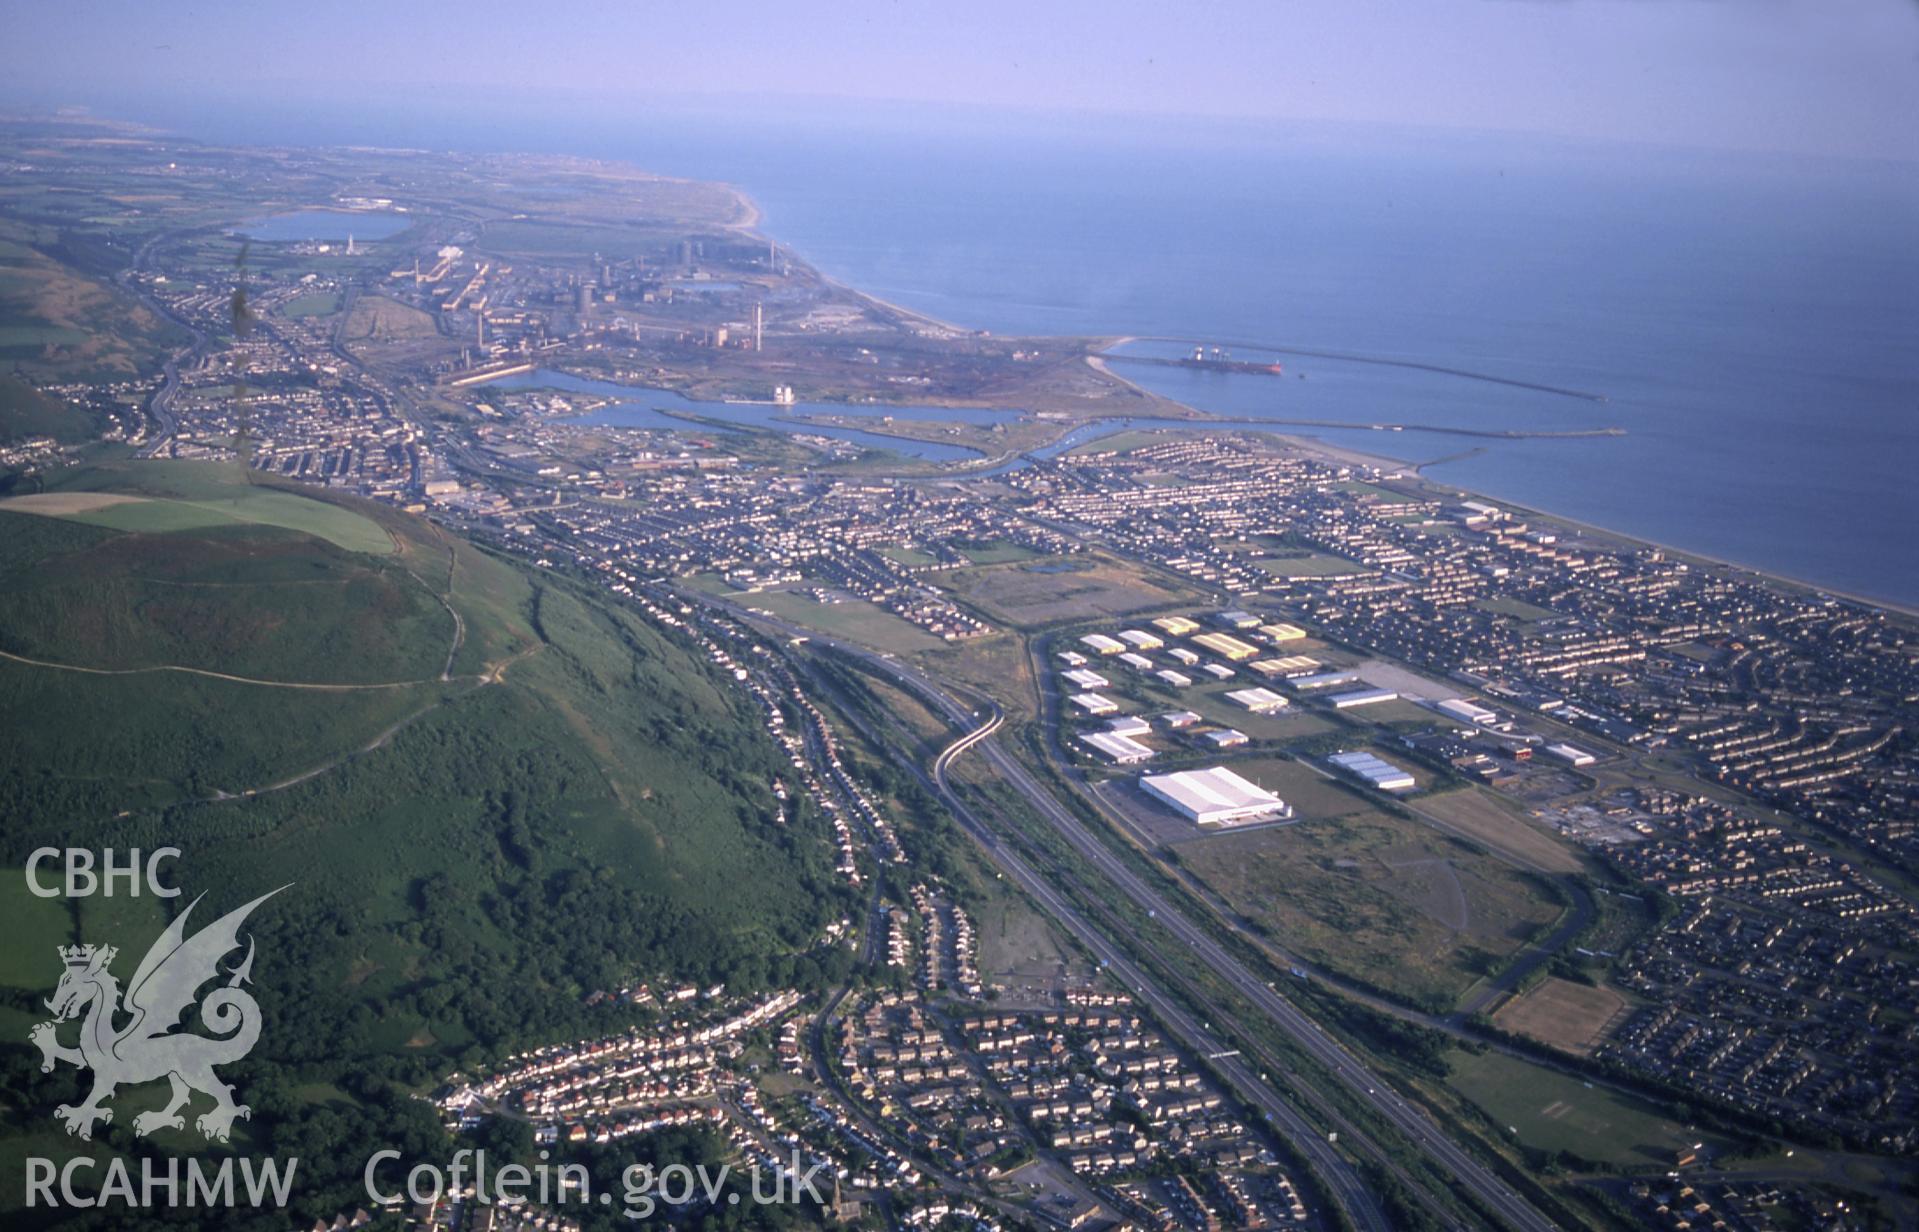 Slide of RCAHMW colour oblique aerial photograph of Port Talbot Docks, taken by T.G. Driver, 26/7/1999.